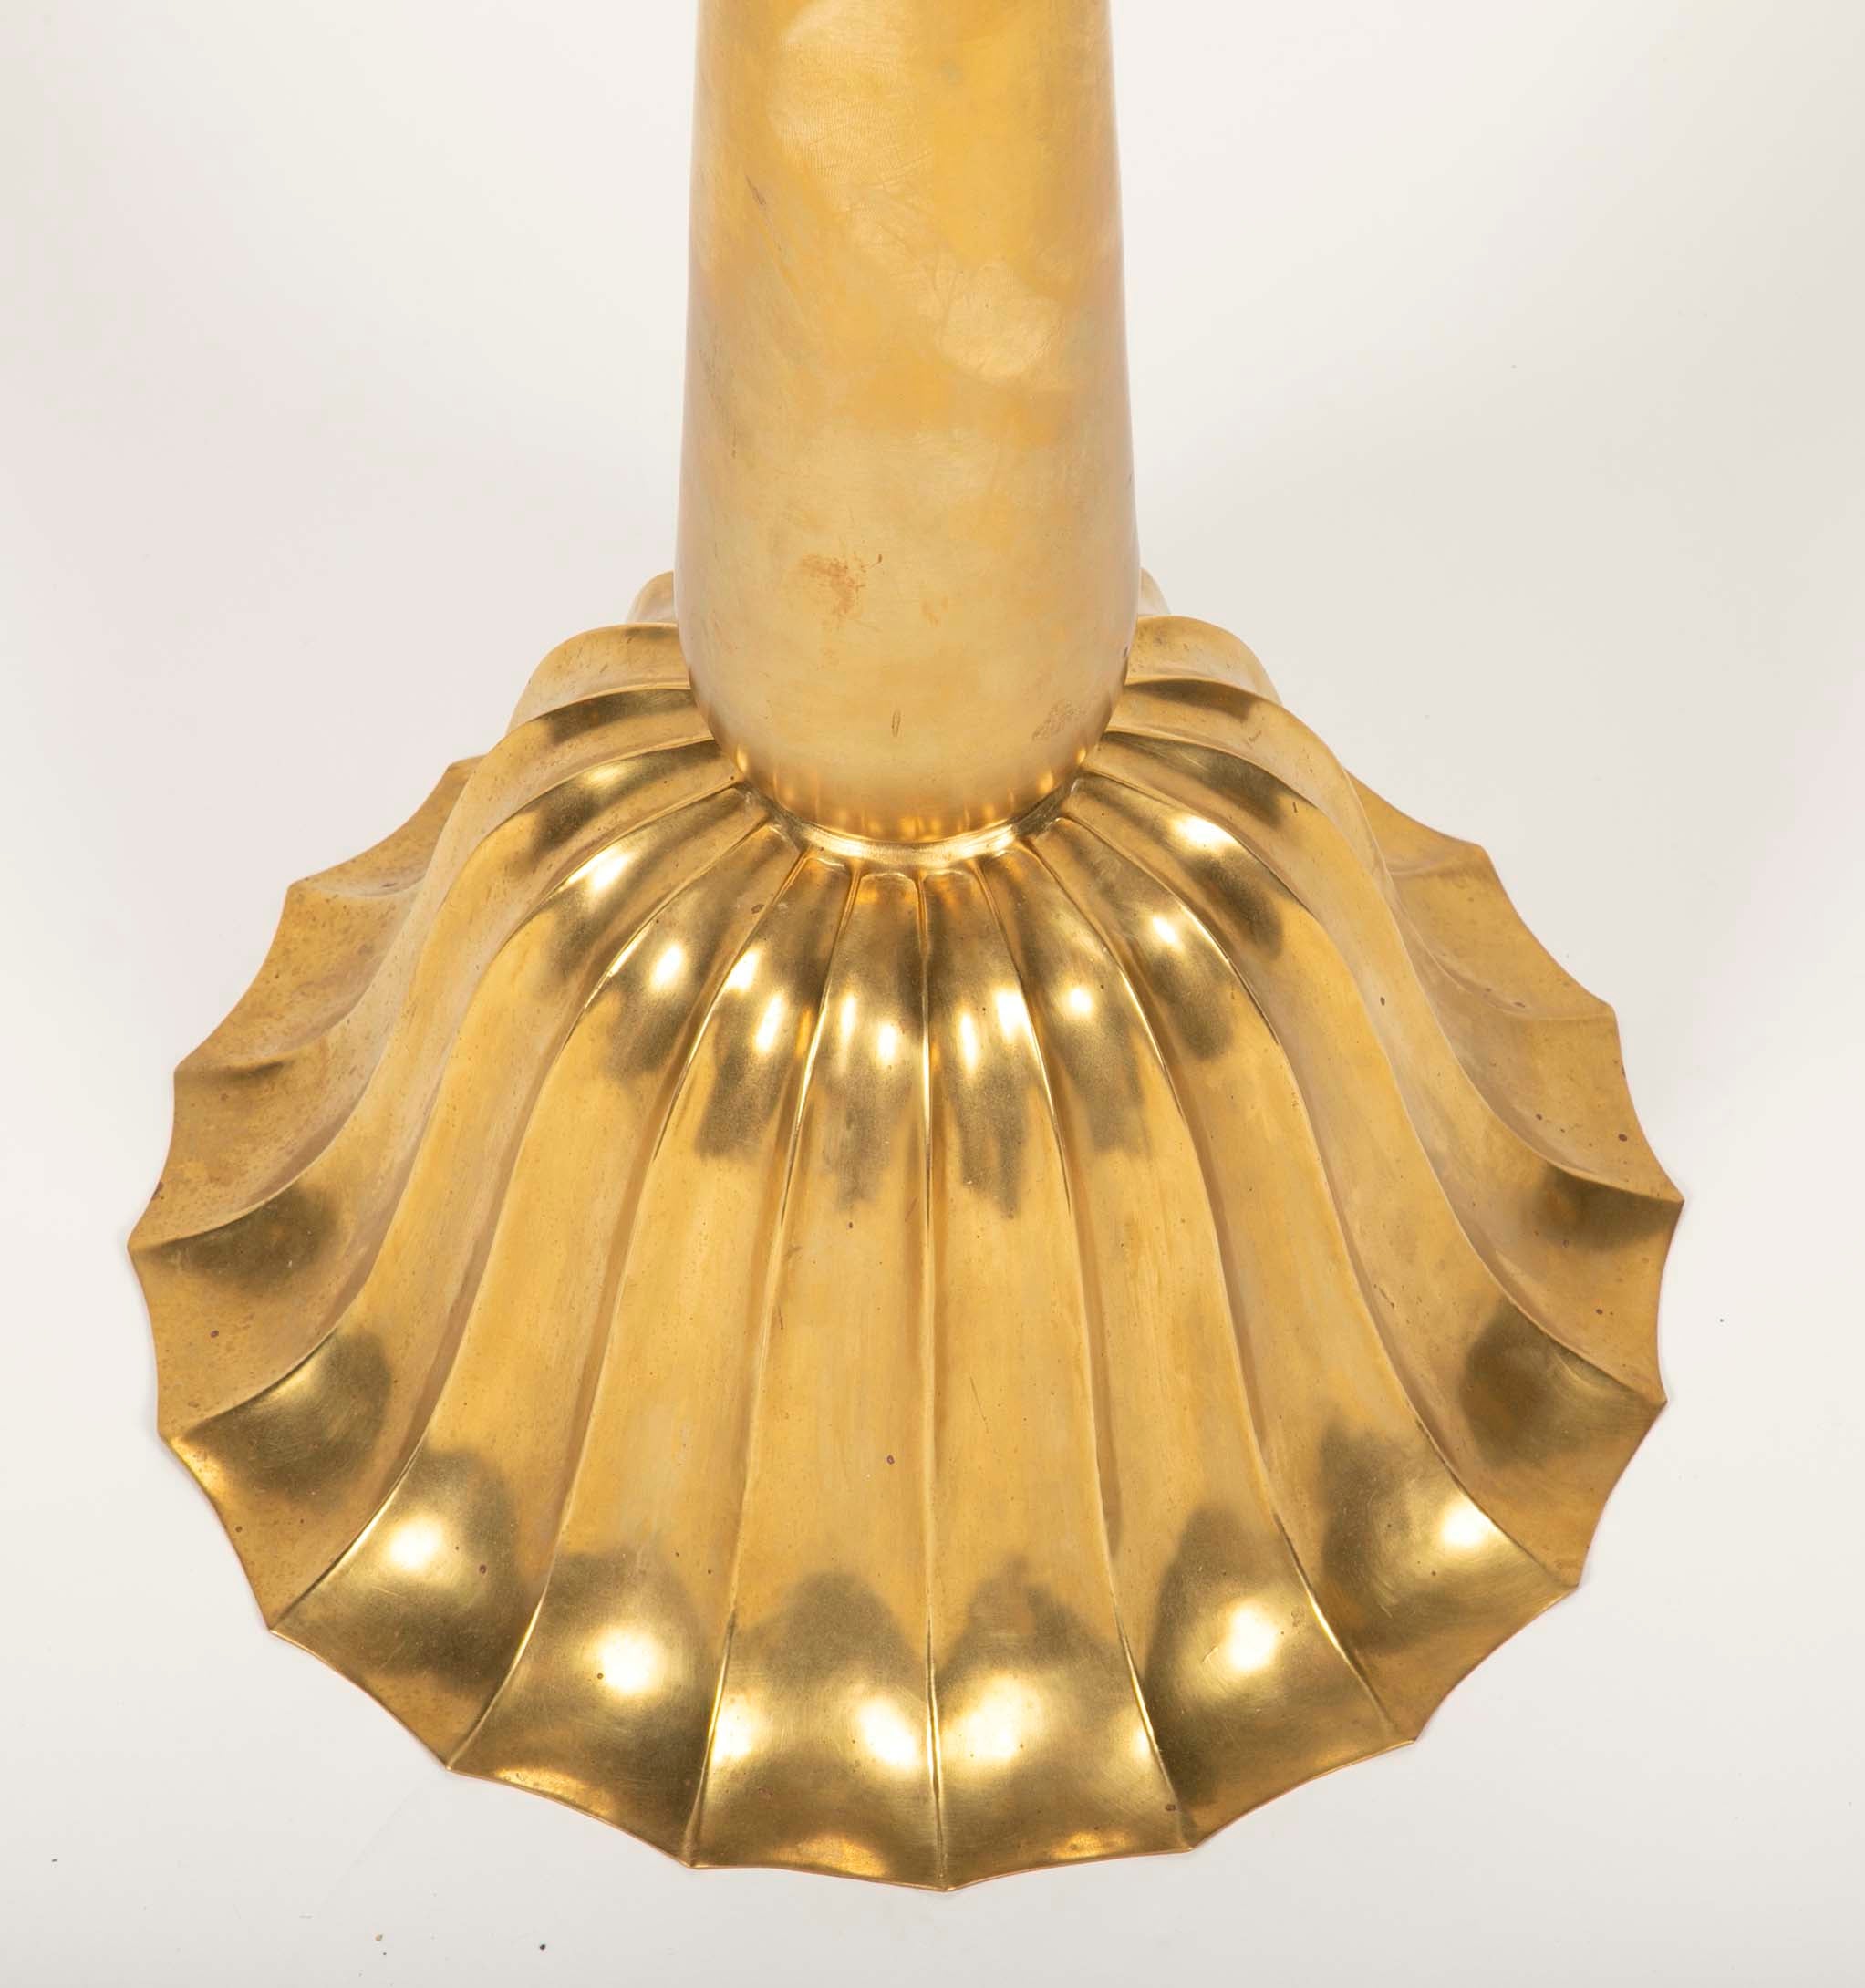 A Handmade Brass Finial from India